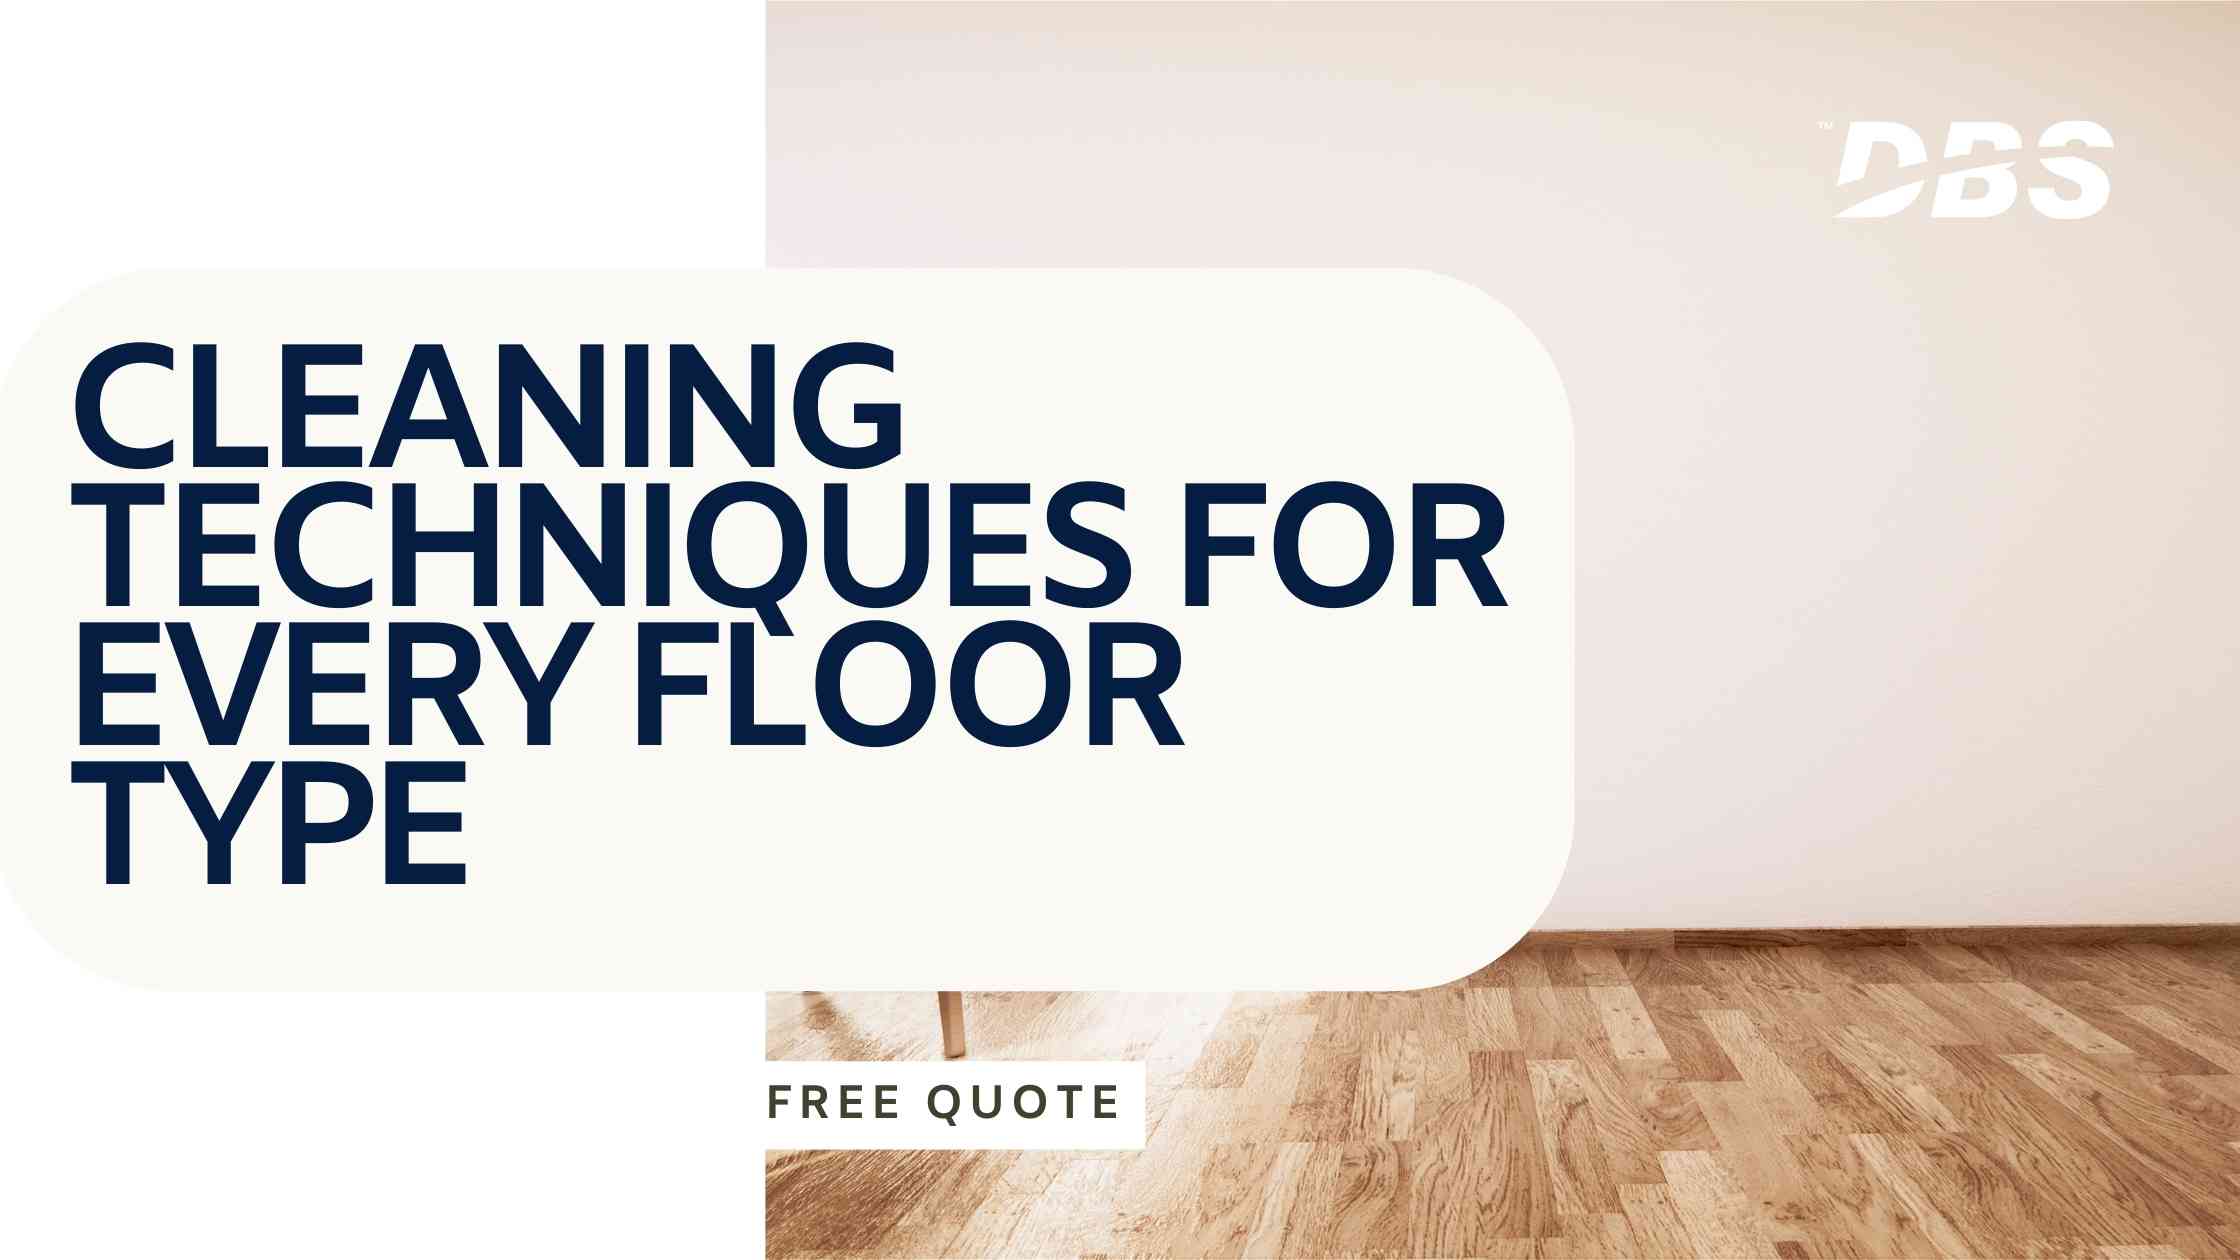 Cleaning Techniques for Every Floor Type